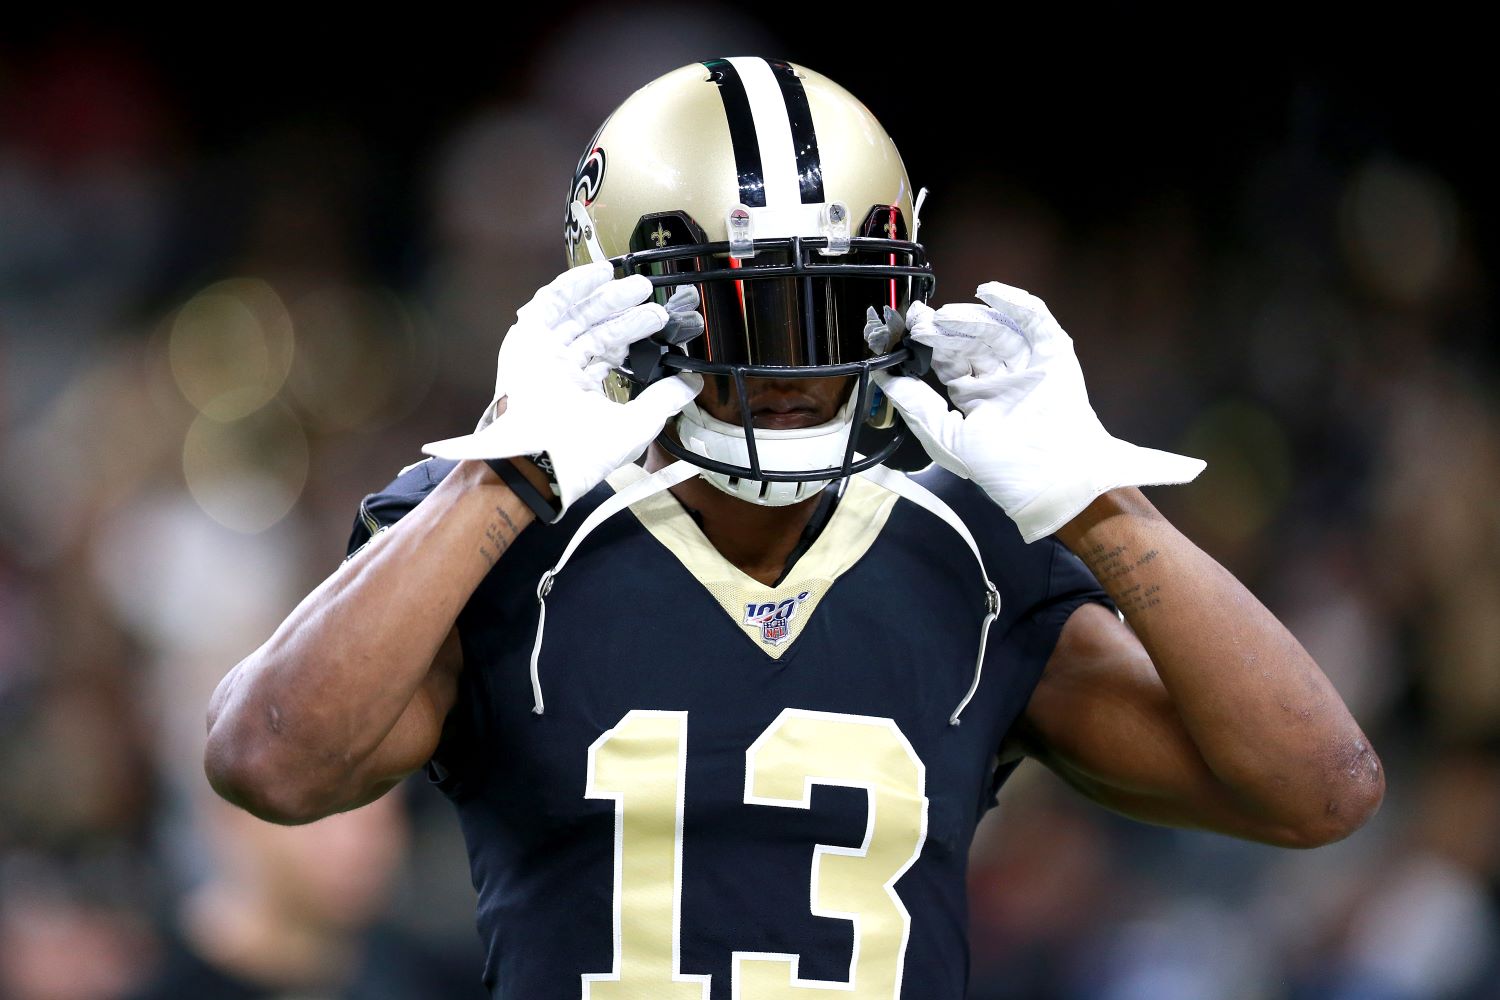 Having already missed several games because of his ankle, New Orleans Saints star Michael Thomas just suffered another injury setback.